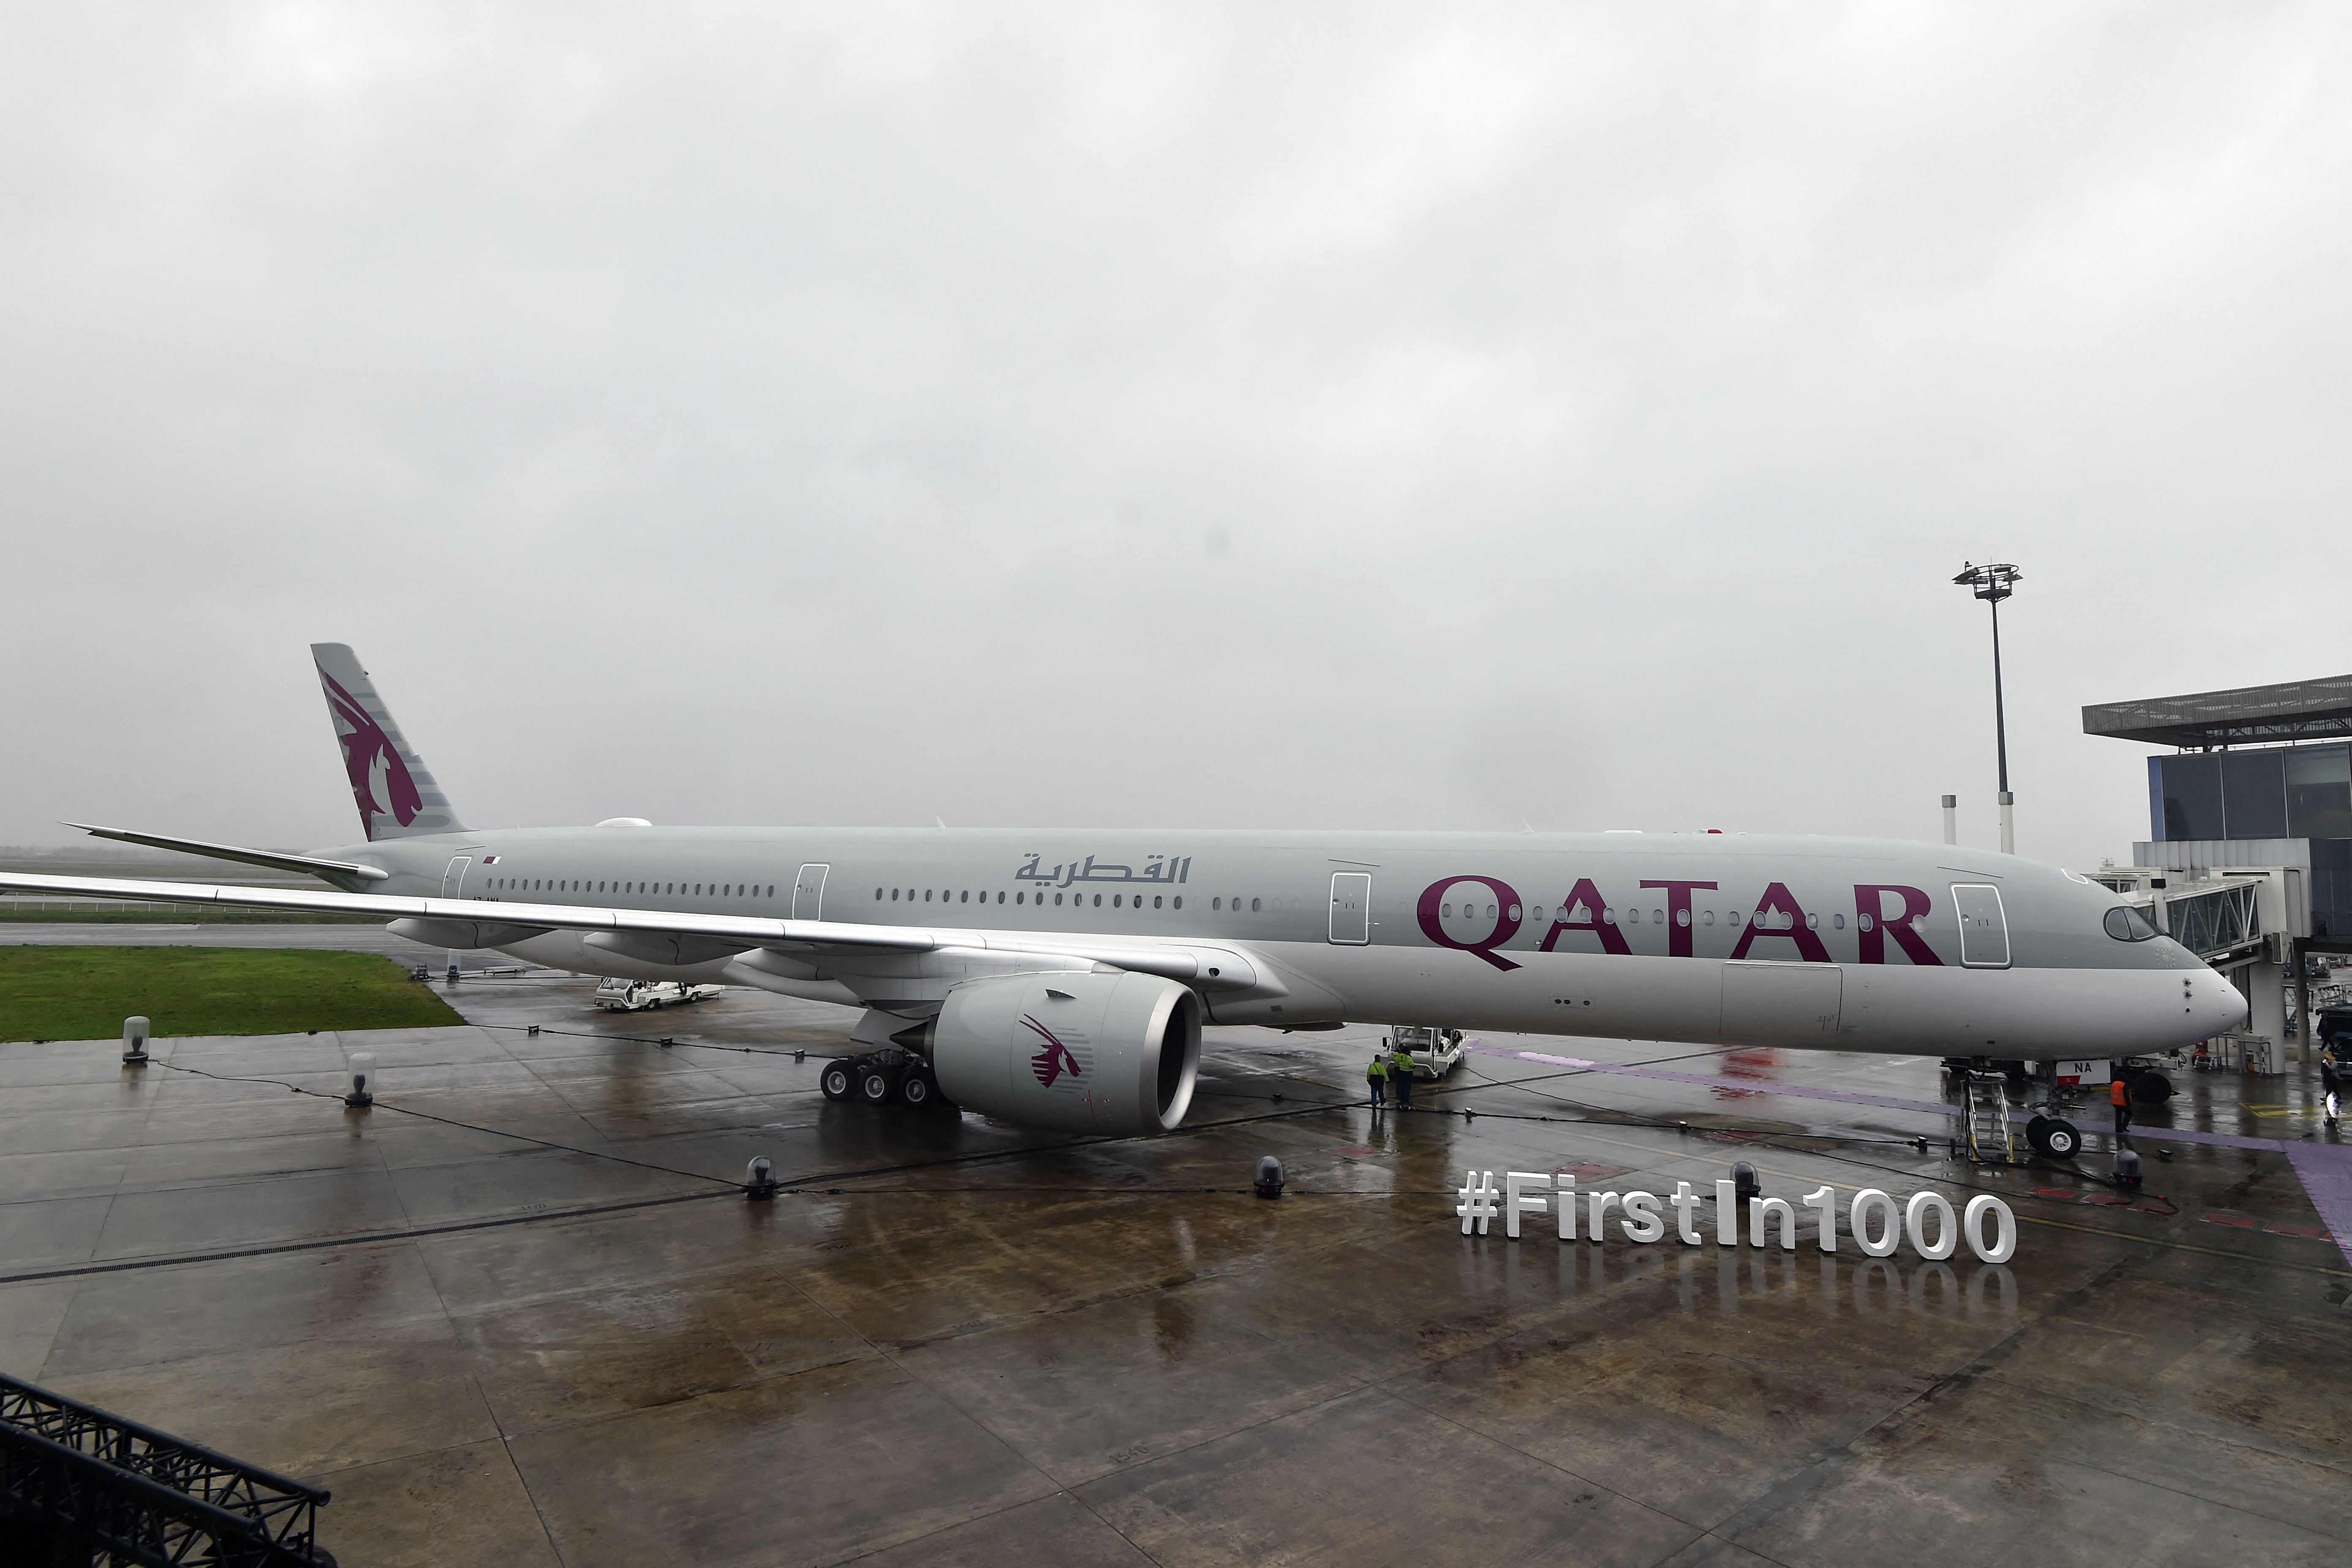 The first Airbus A350-1000, bearing the logo of Qatar Airways, is stationed on the tarmac on February 20, 2018 at the Airbus delivery center, in Colomiers southwestern France.